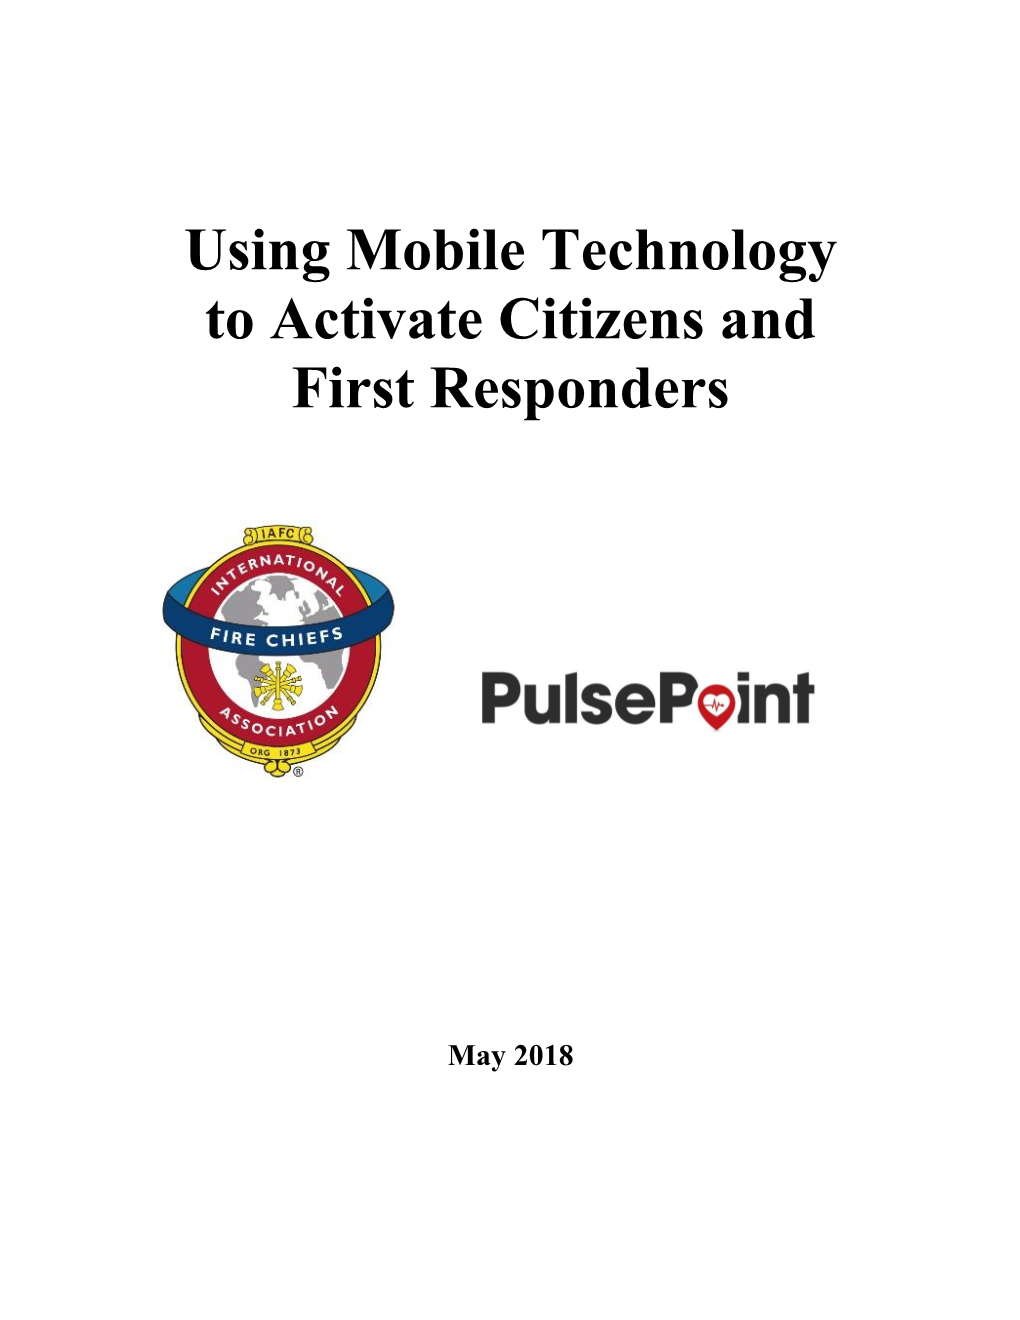 Using Mobile Technology to Activate Citizens and First Responders